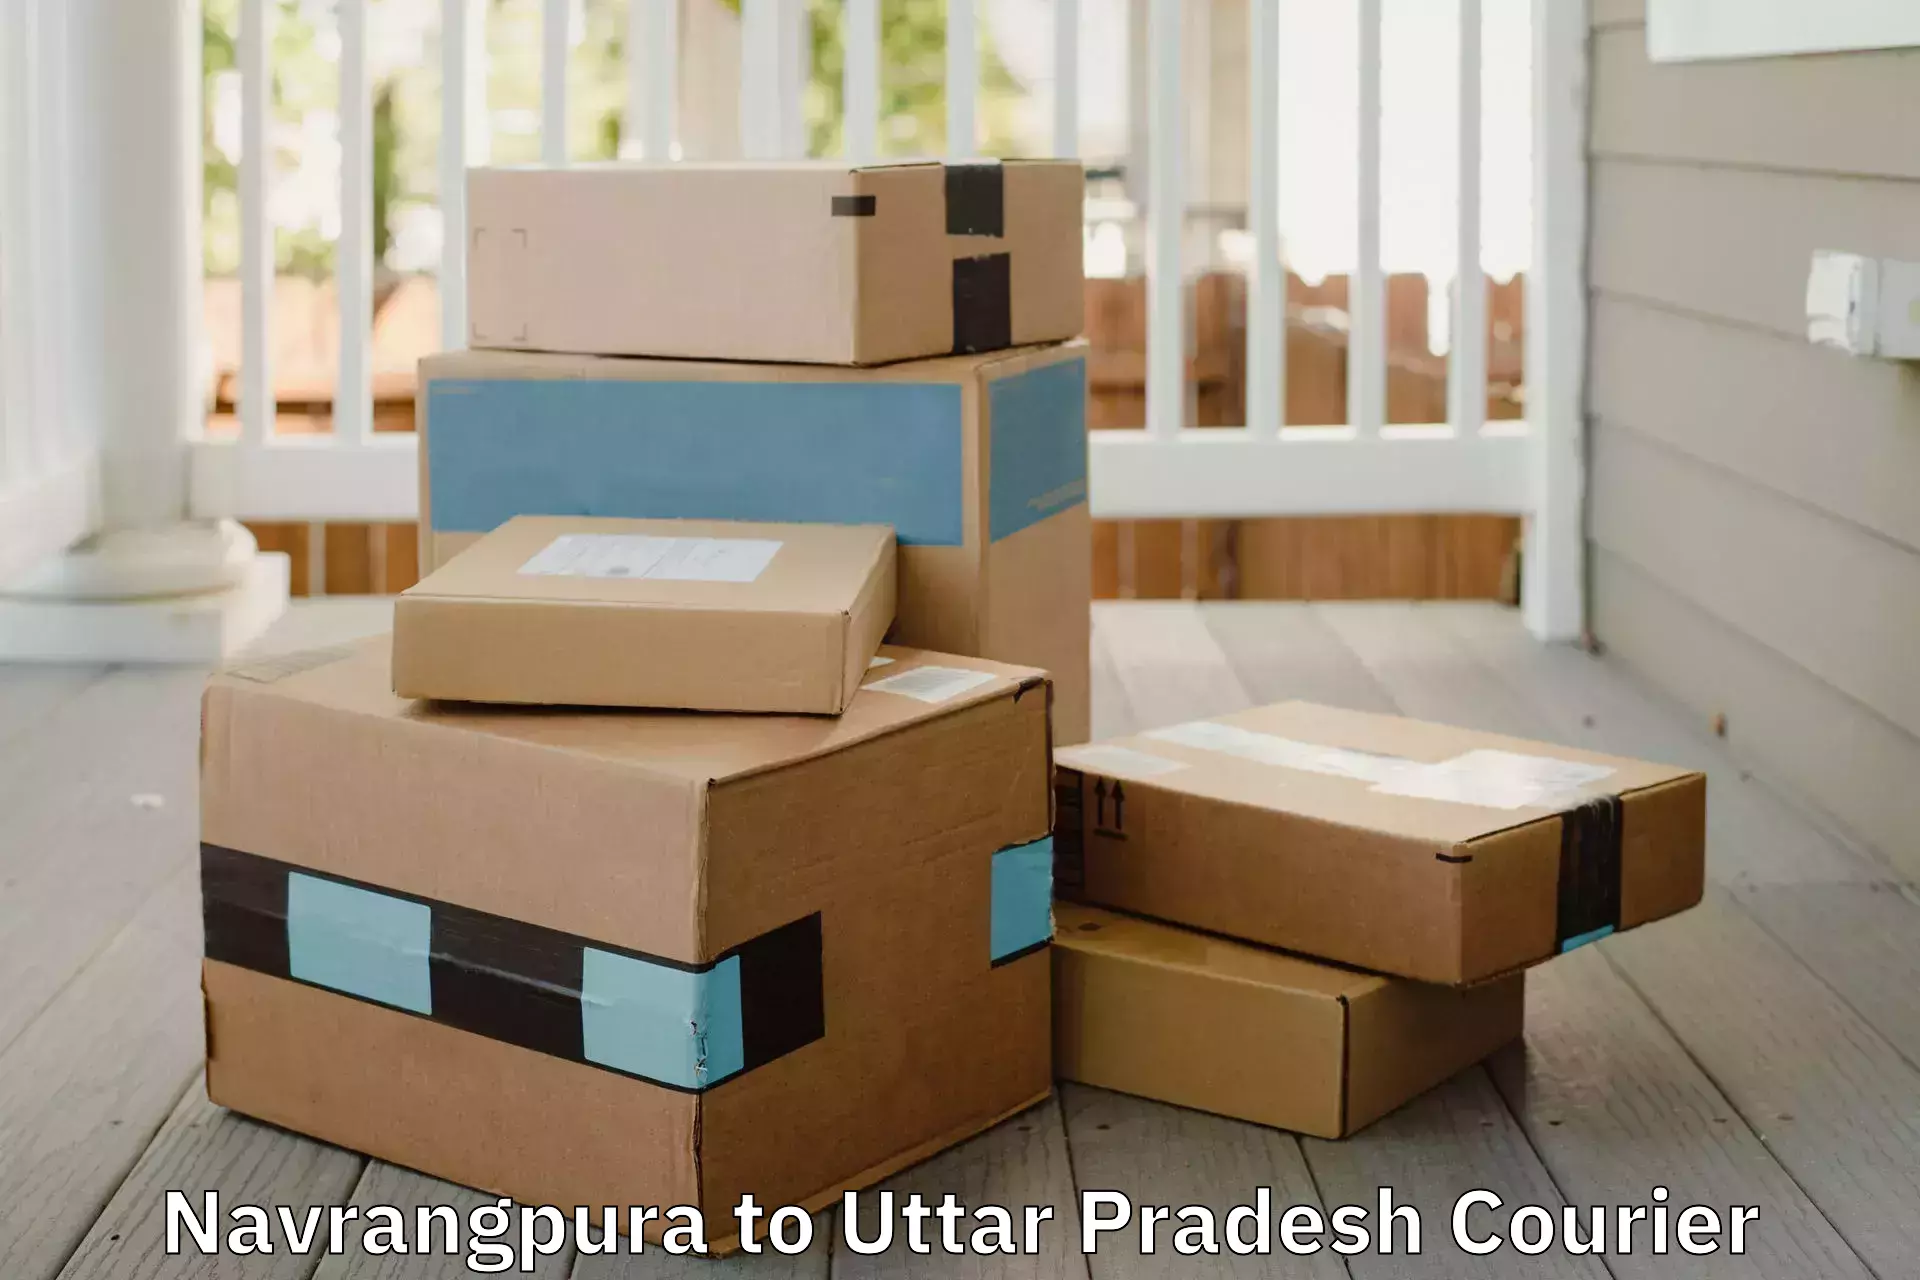 Budget-friendly moving services in Navrangpura to Amethi